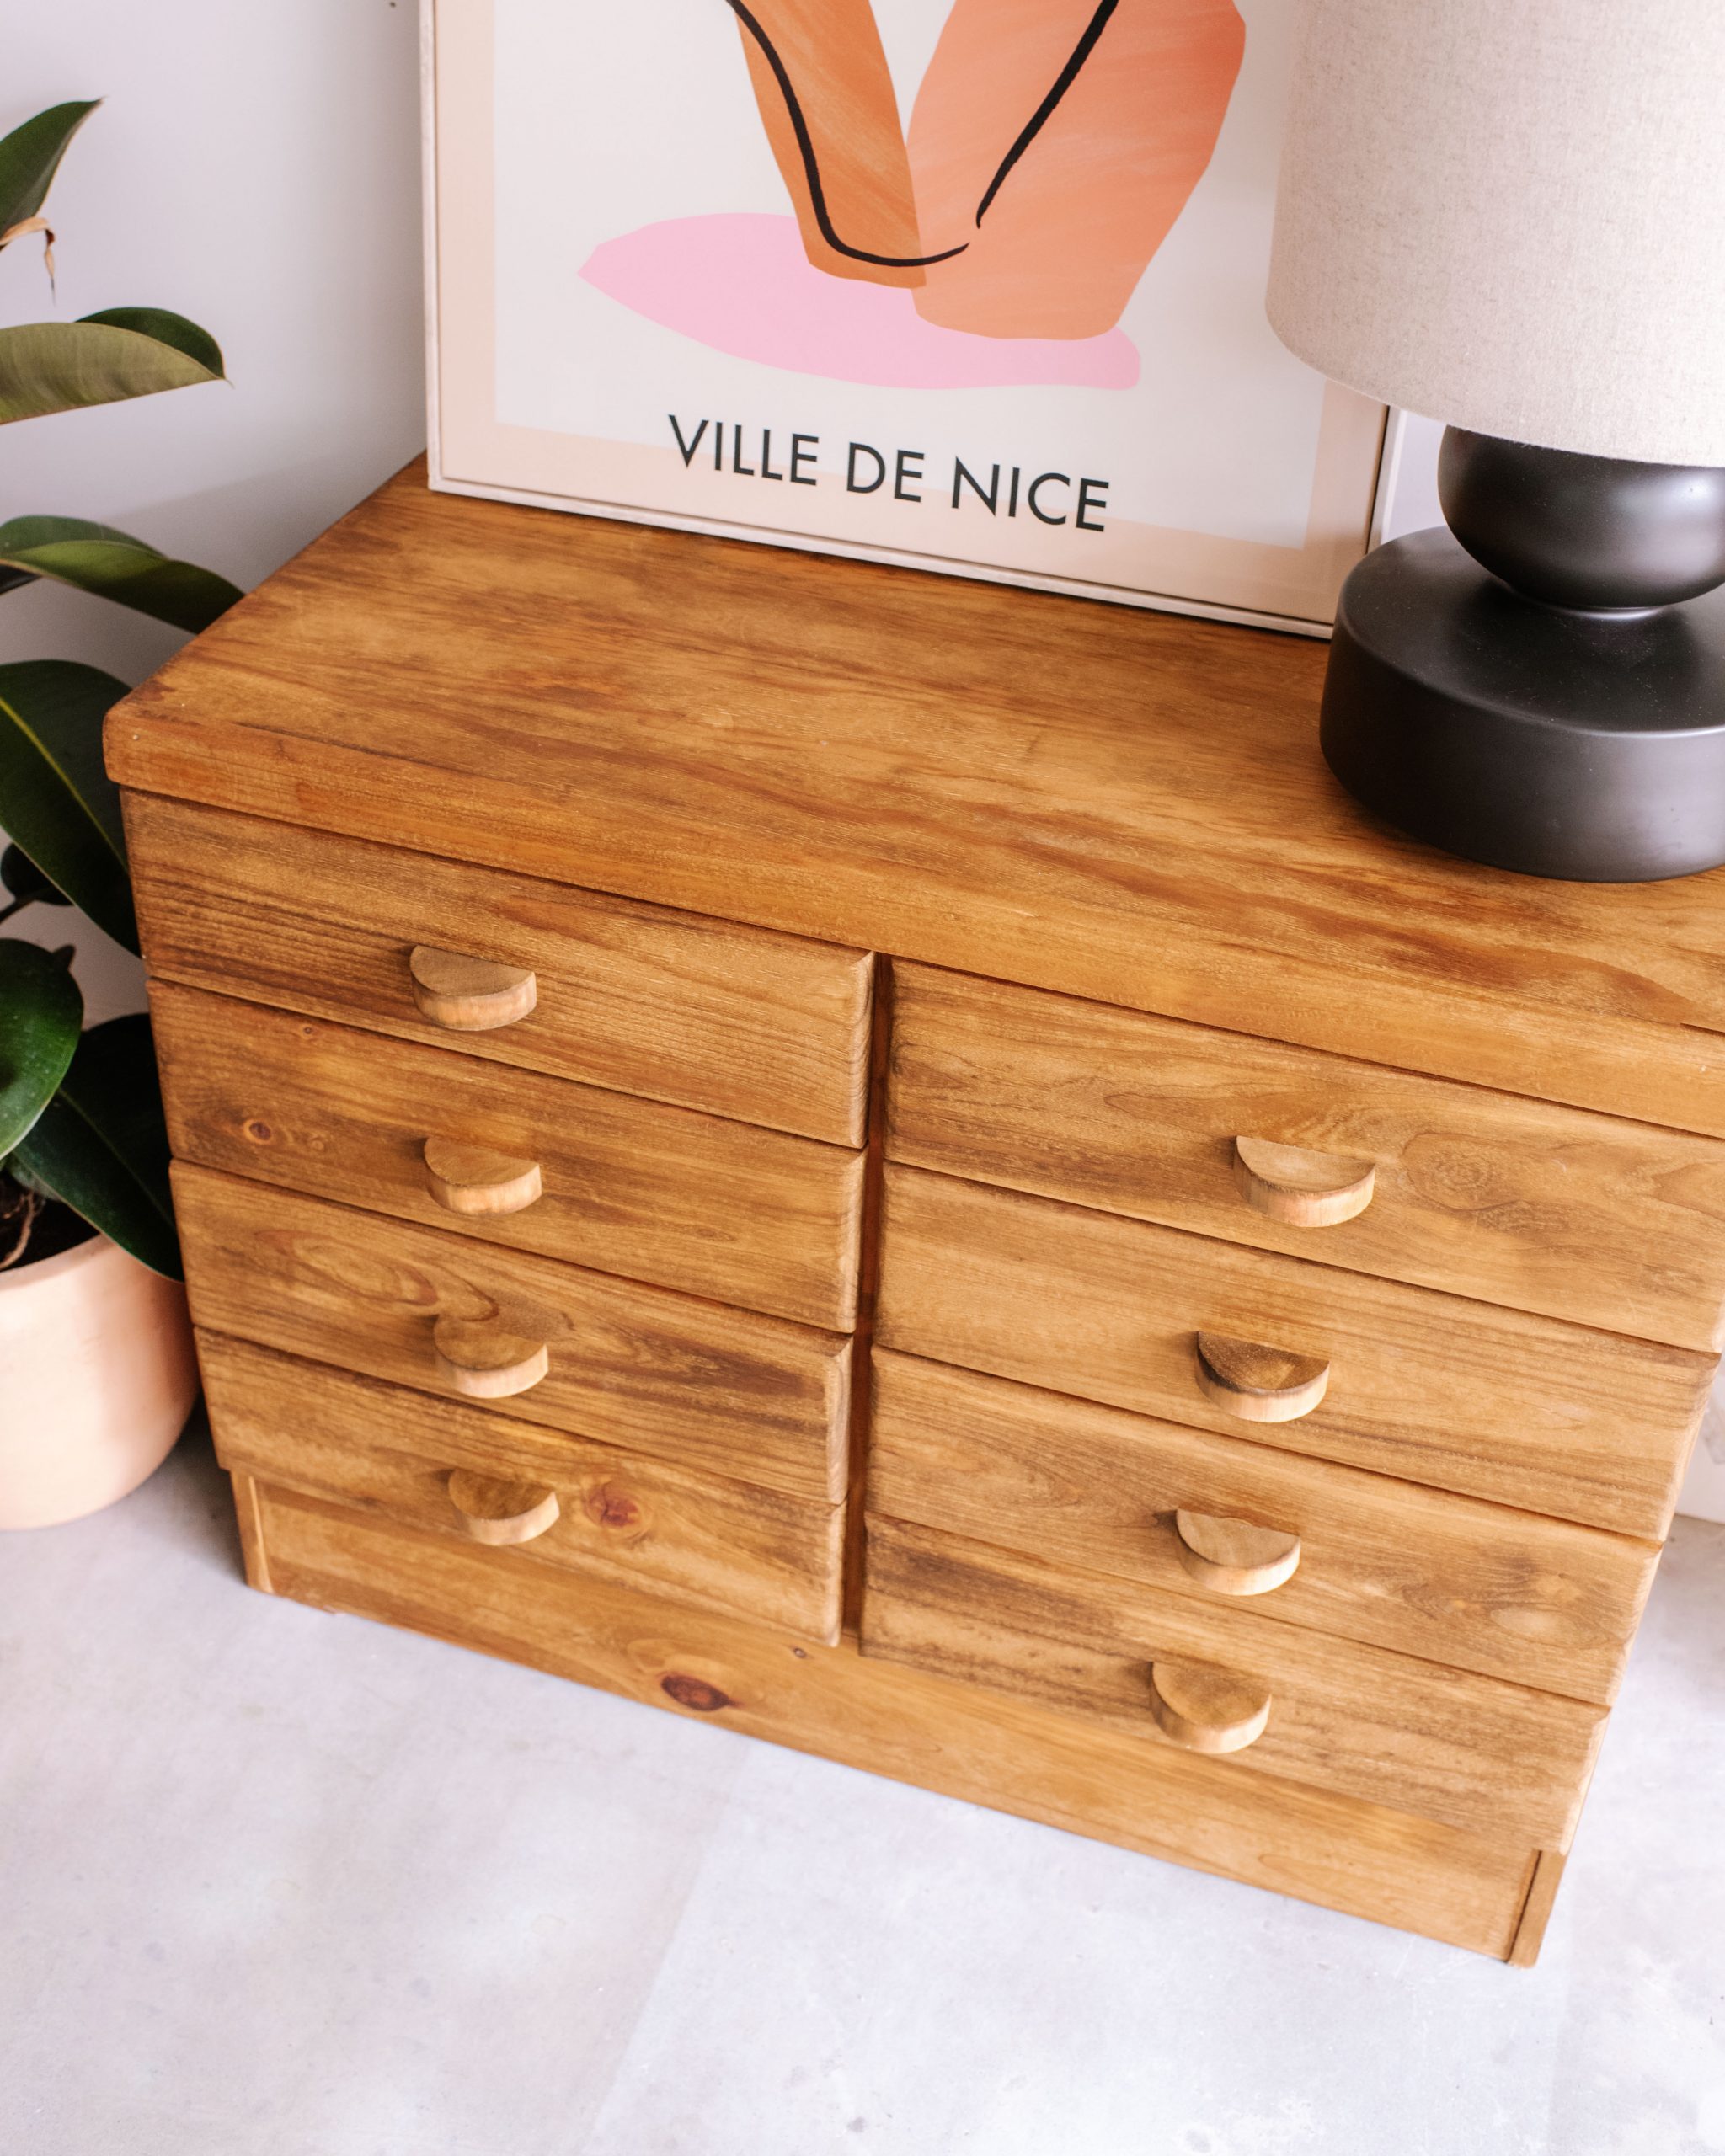 Solid pine art deco inspired upcycled chest of drawers with